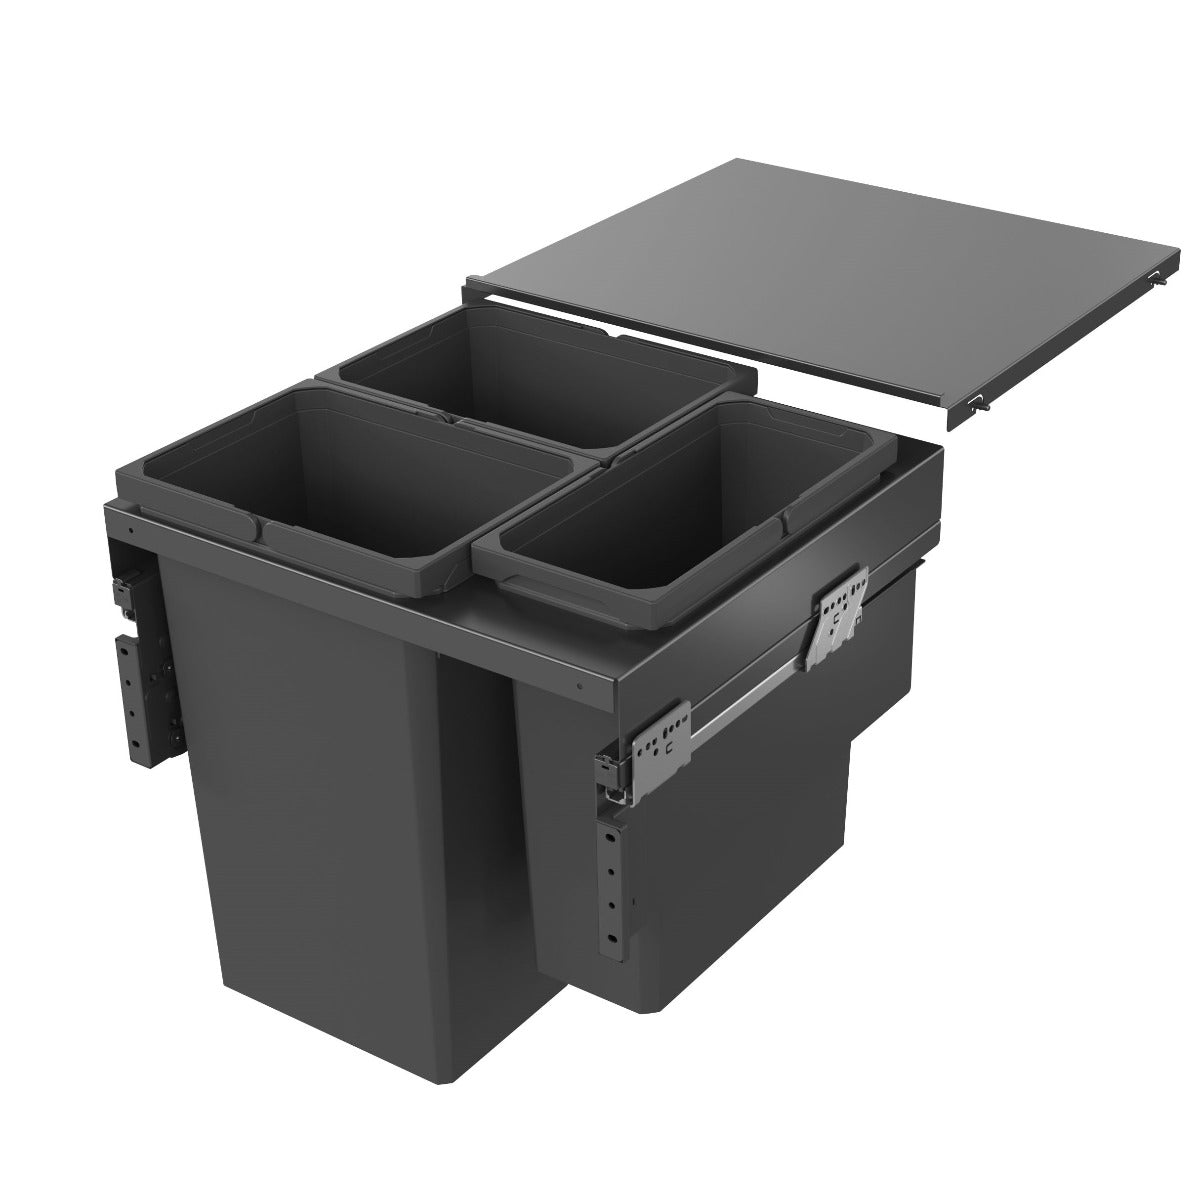 Vauth-Sagel integrated kitchen bin in lava grey with three compartments, ideal for separating waste and recycling